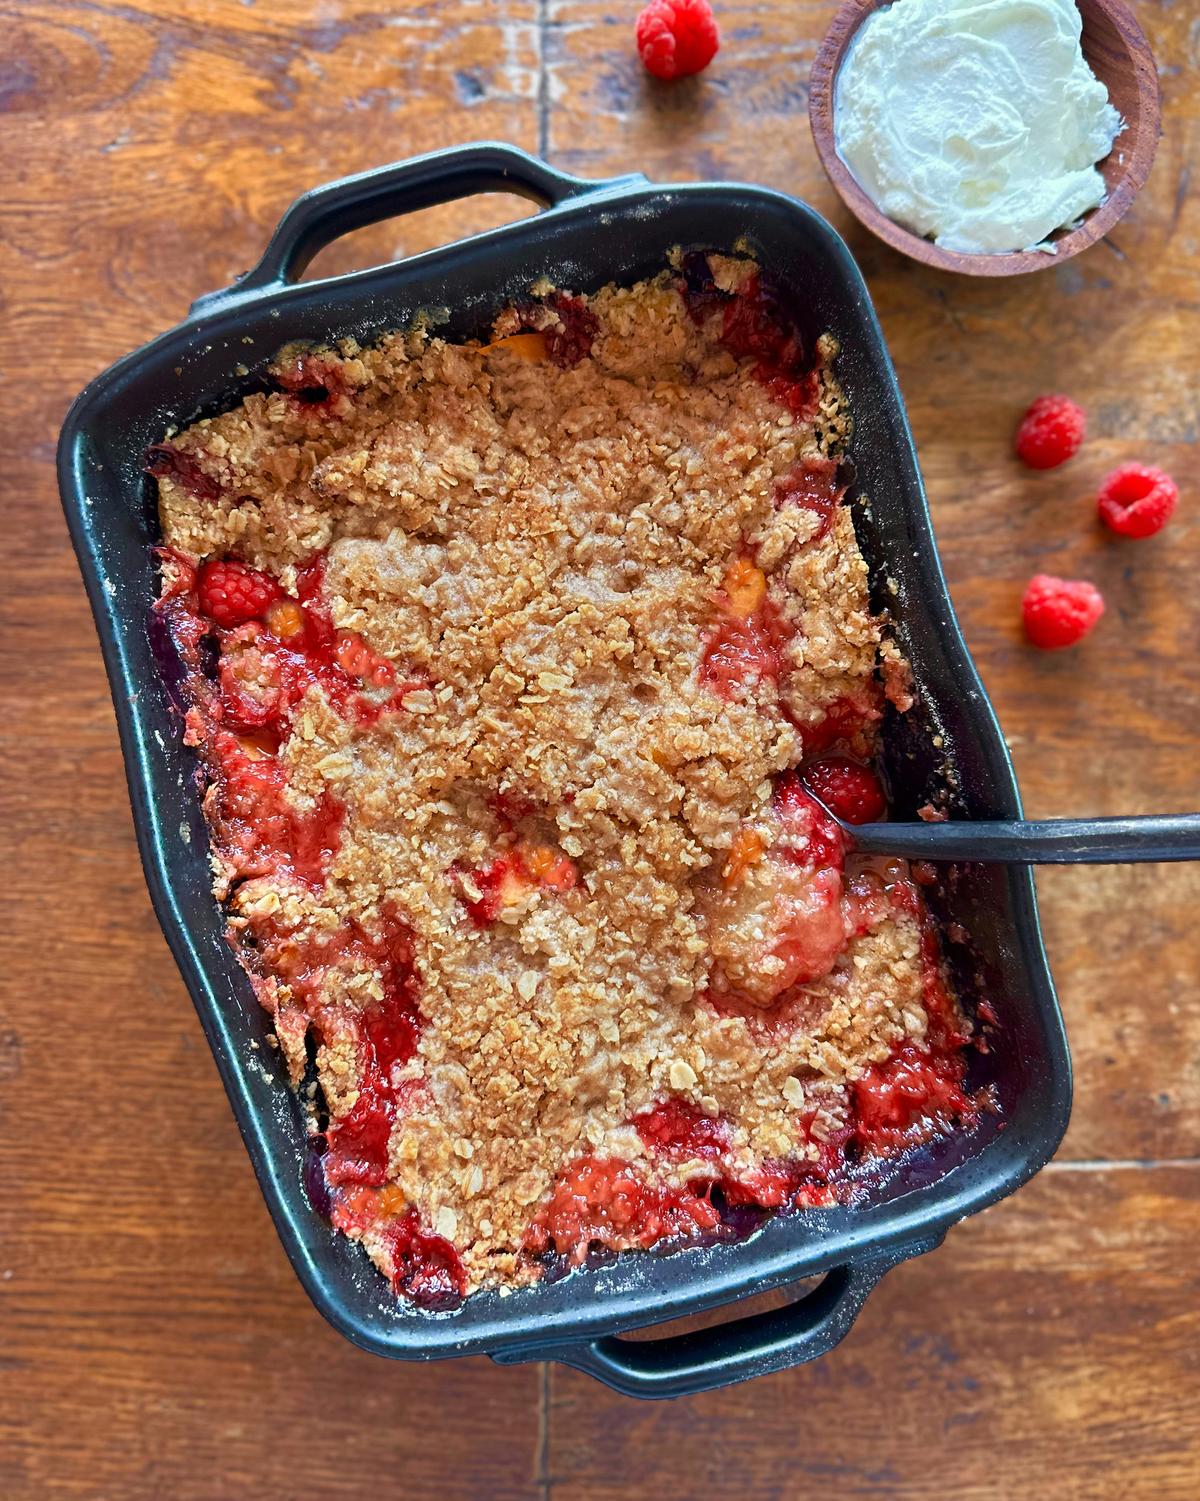 This recipe combines the natural tartness of raspberries with the juicy tang of nectarines. (Lynda Balslev for Tastefood)